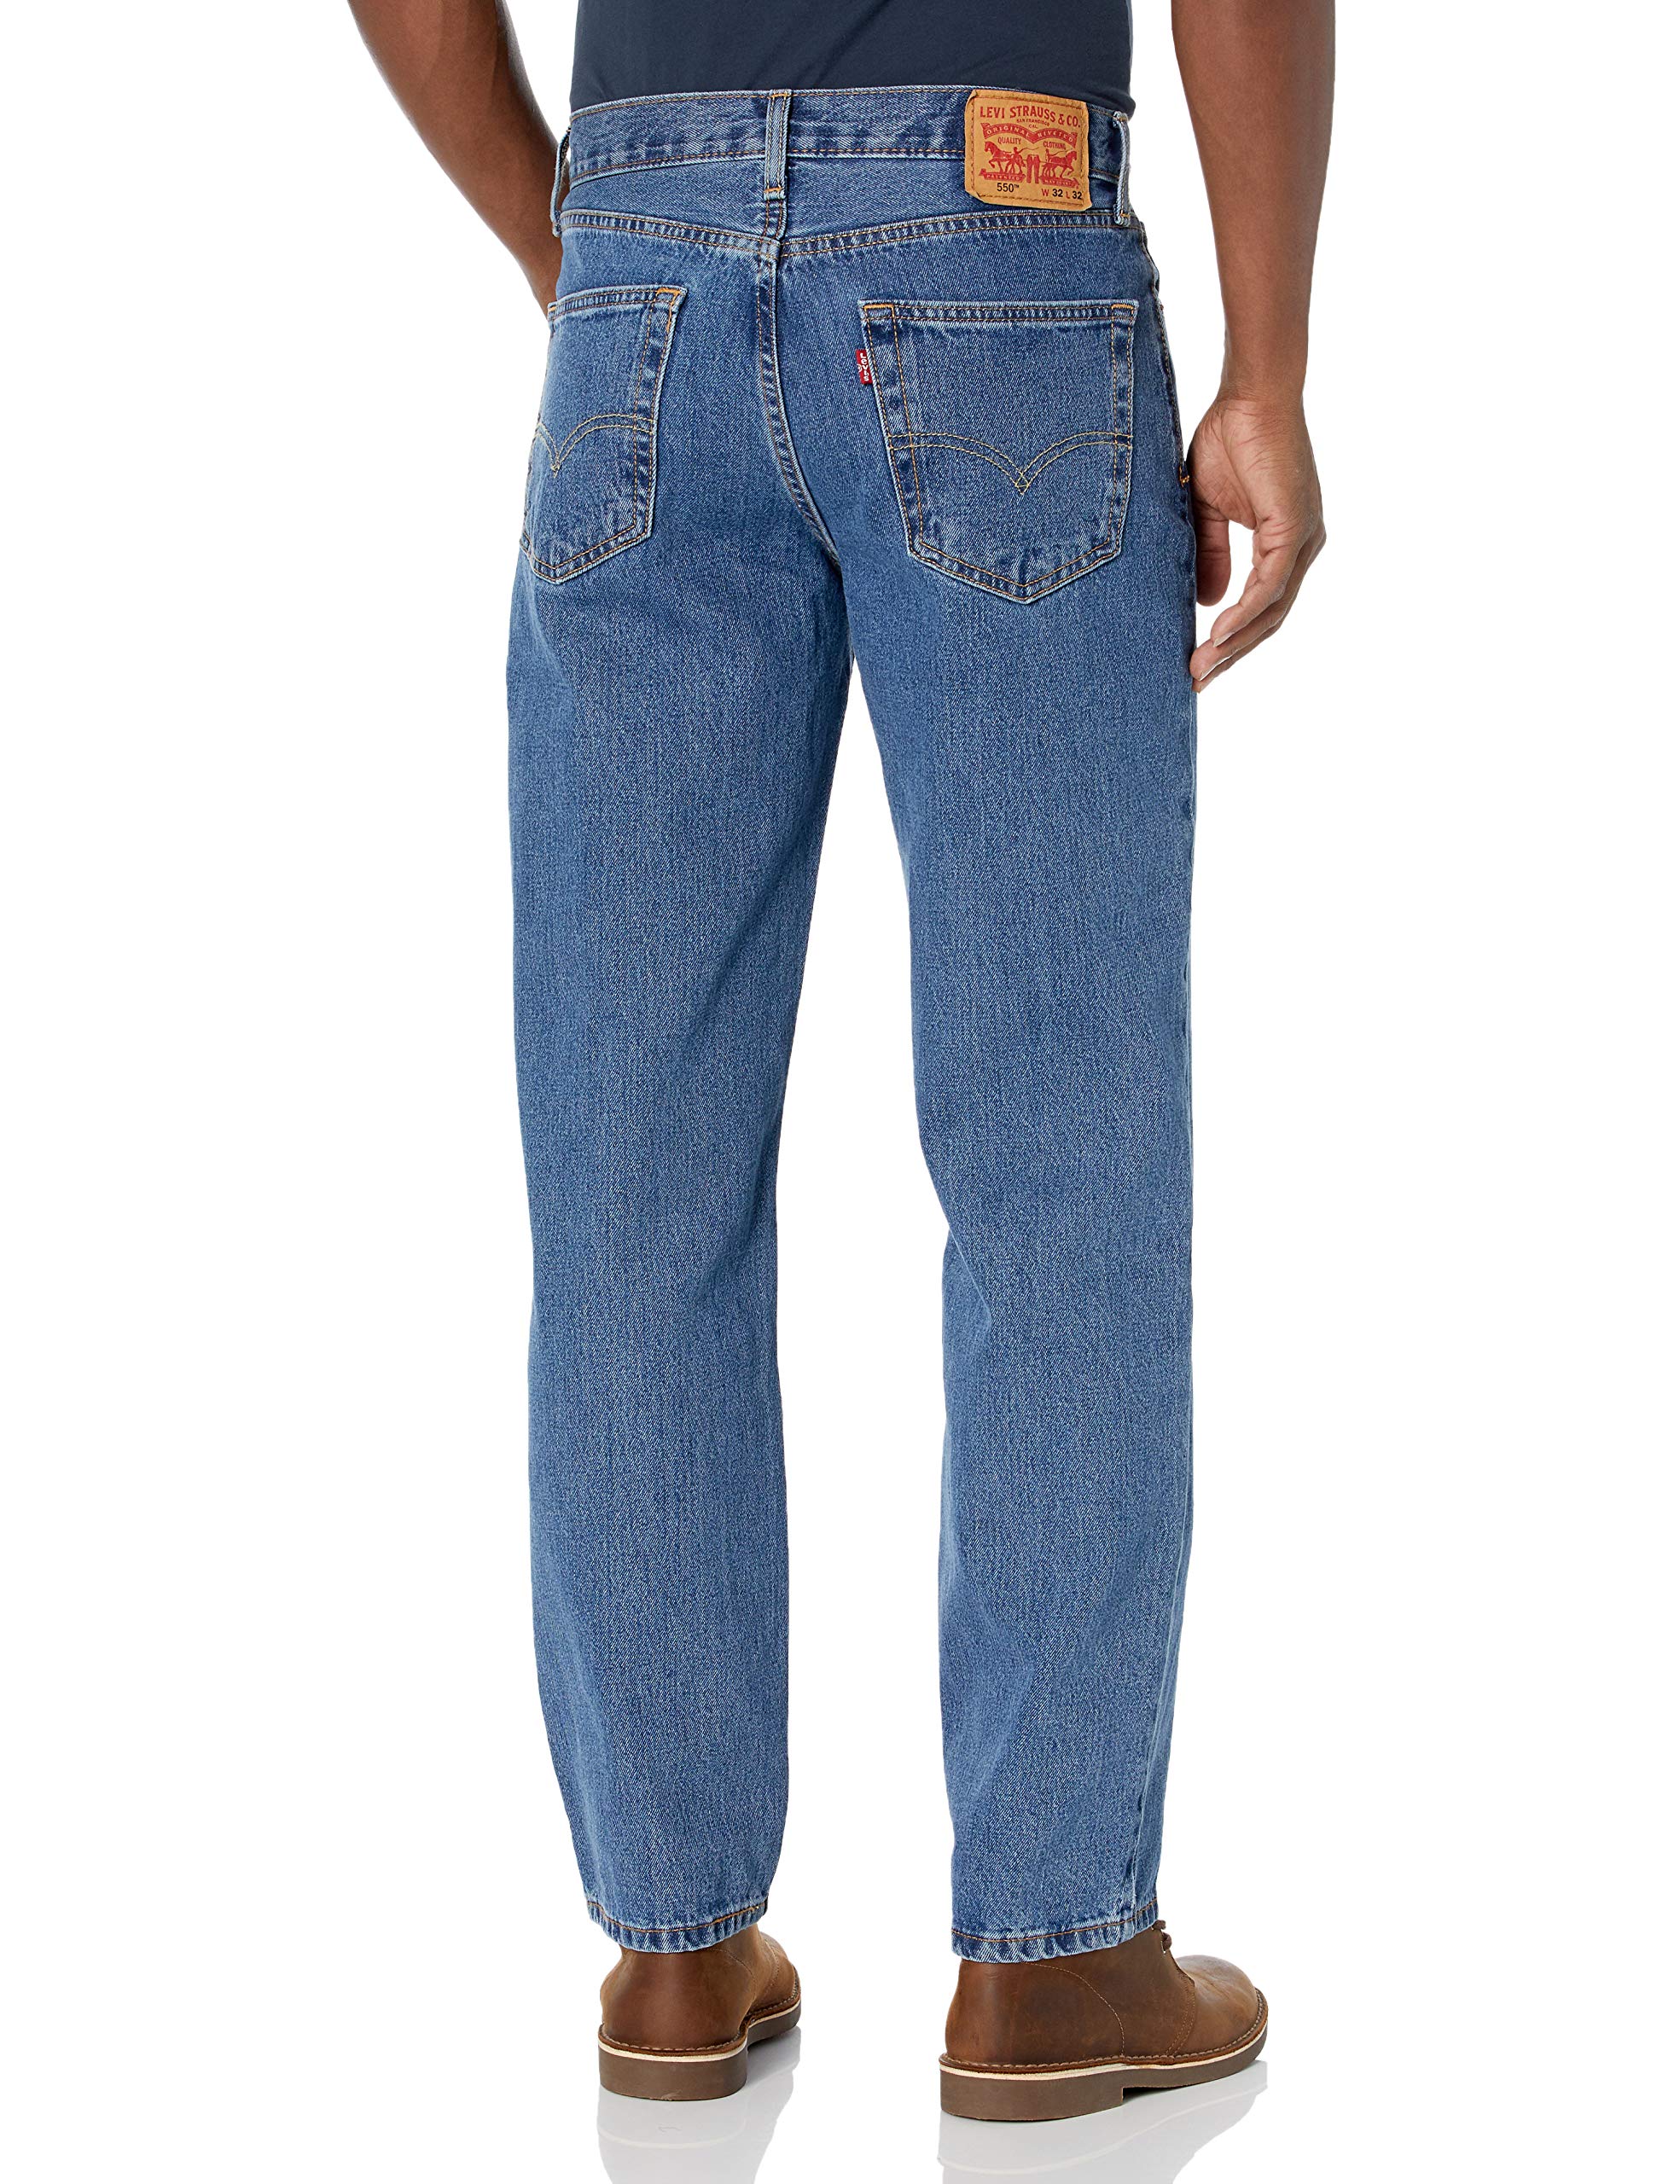 Levi's Men's 550 Relaxed Fit Jeans (Also Available in Big & Tall), Medium Stonewash, 38W x 32L